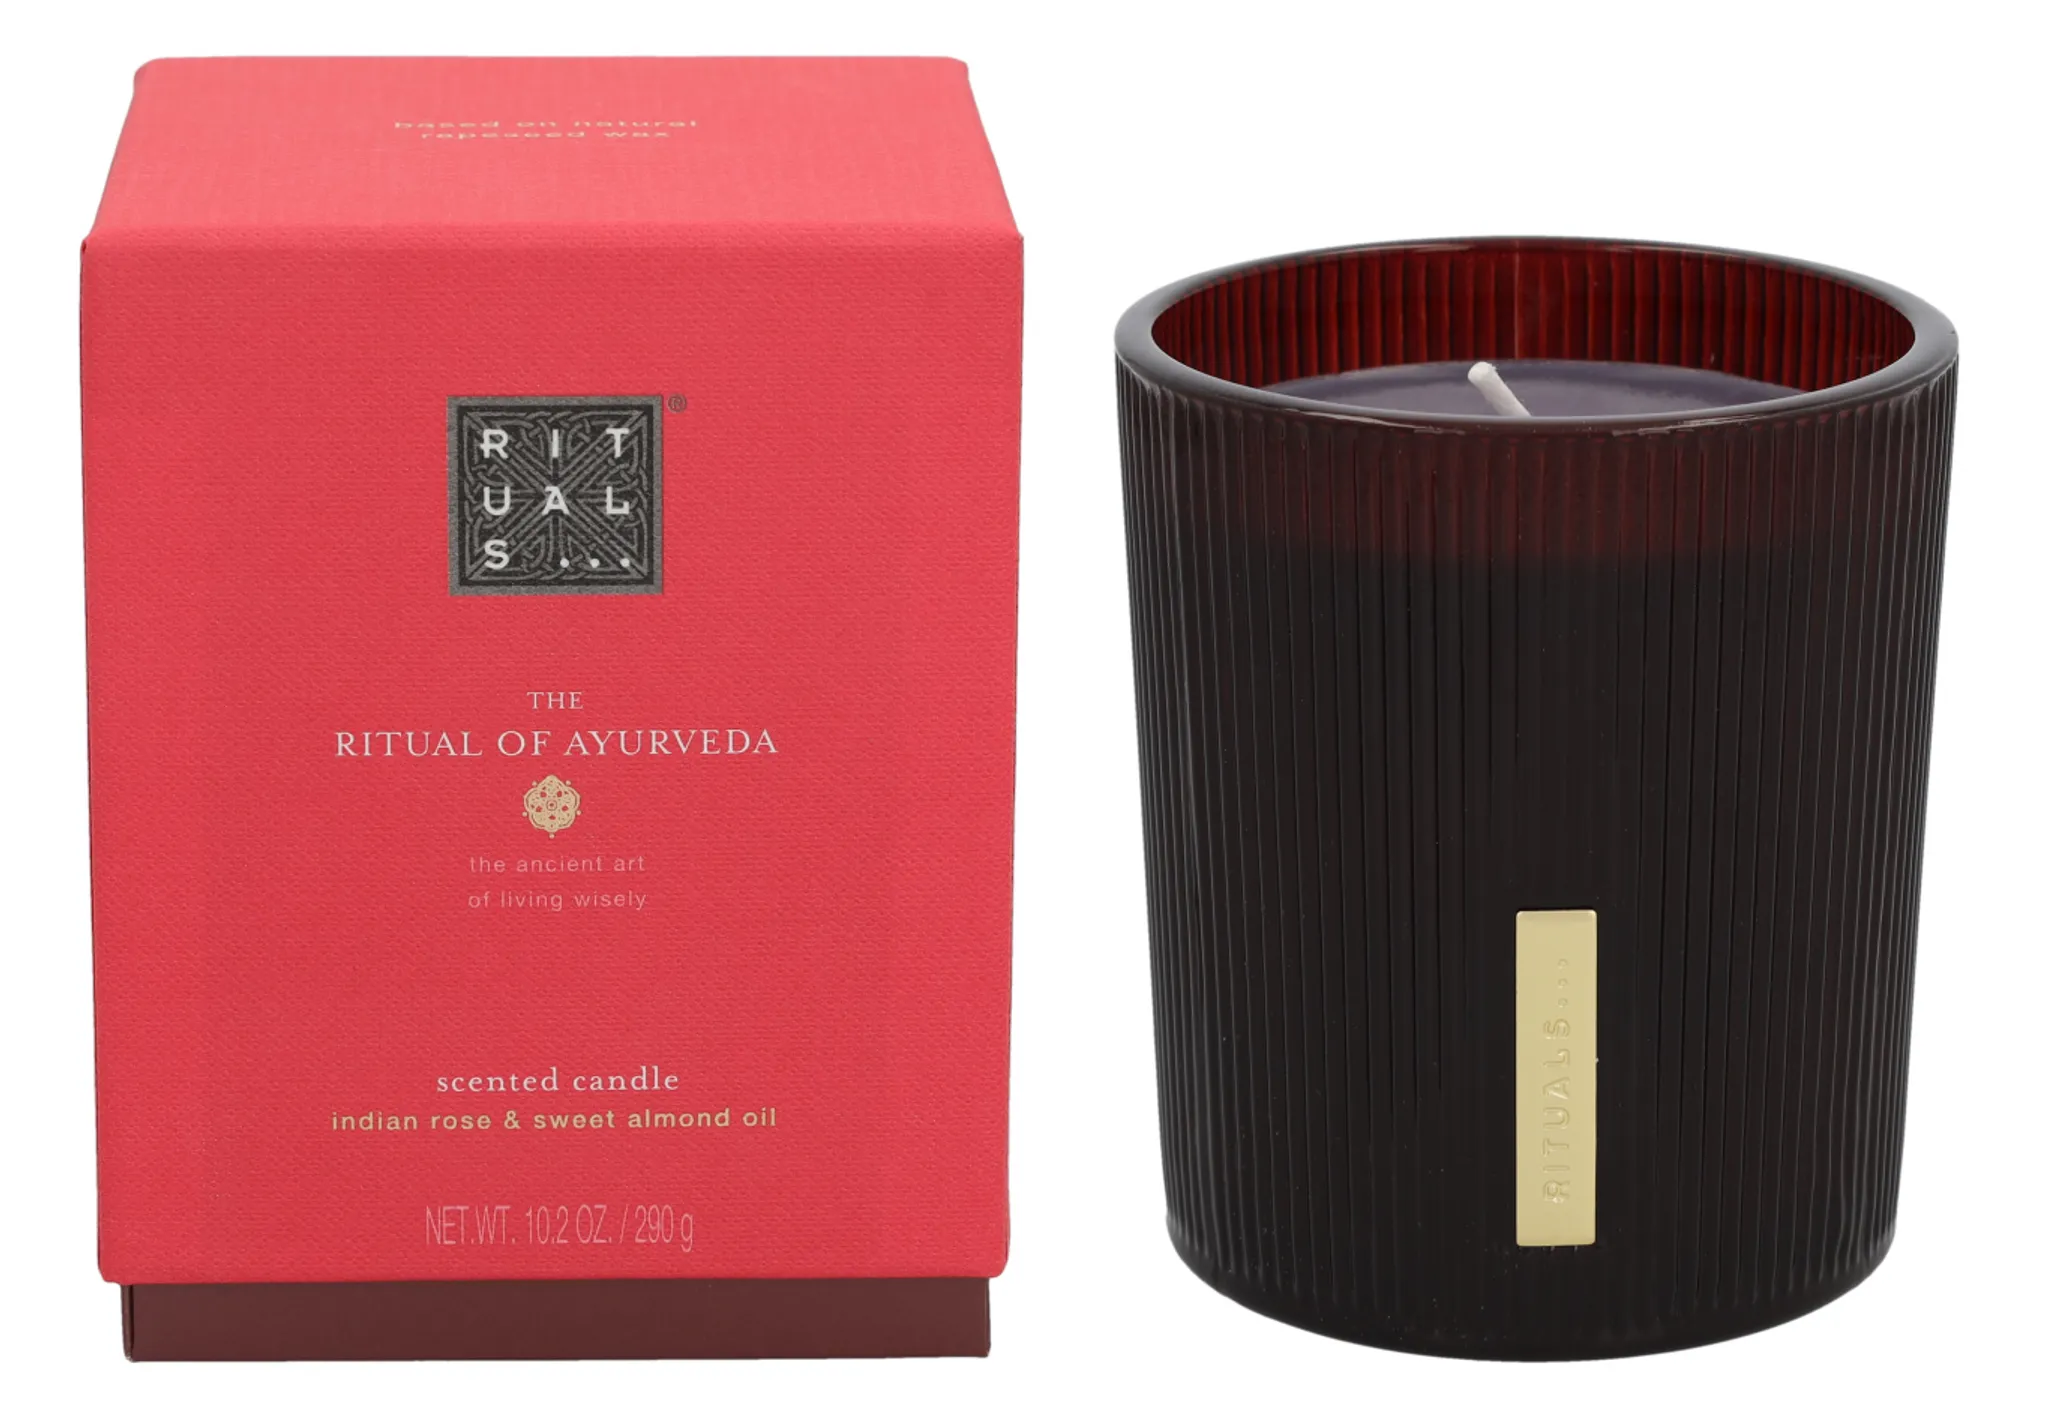 Rituals The Ritual of Ayurveda Scented Candle - Duftkerze Indische